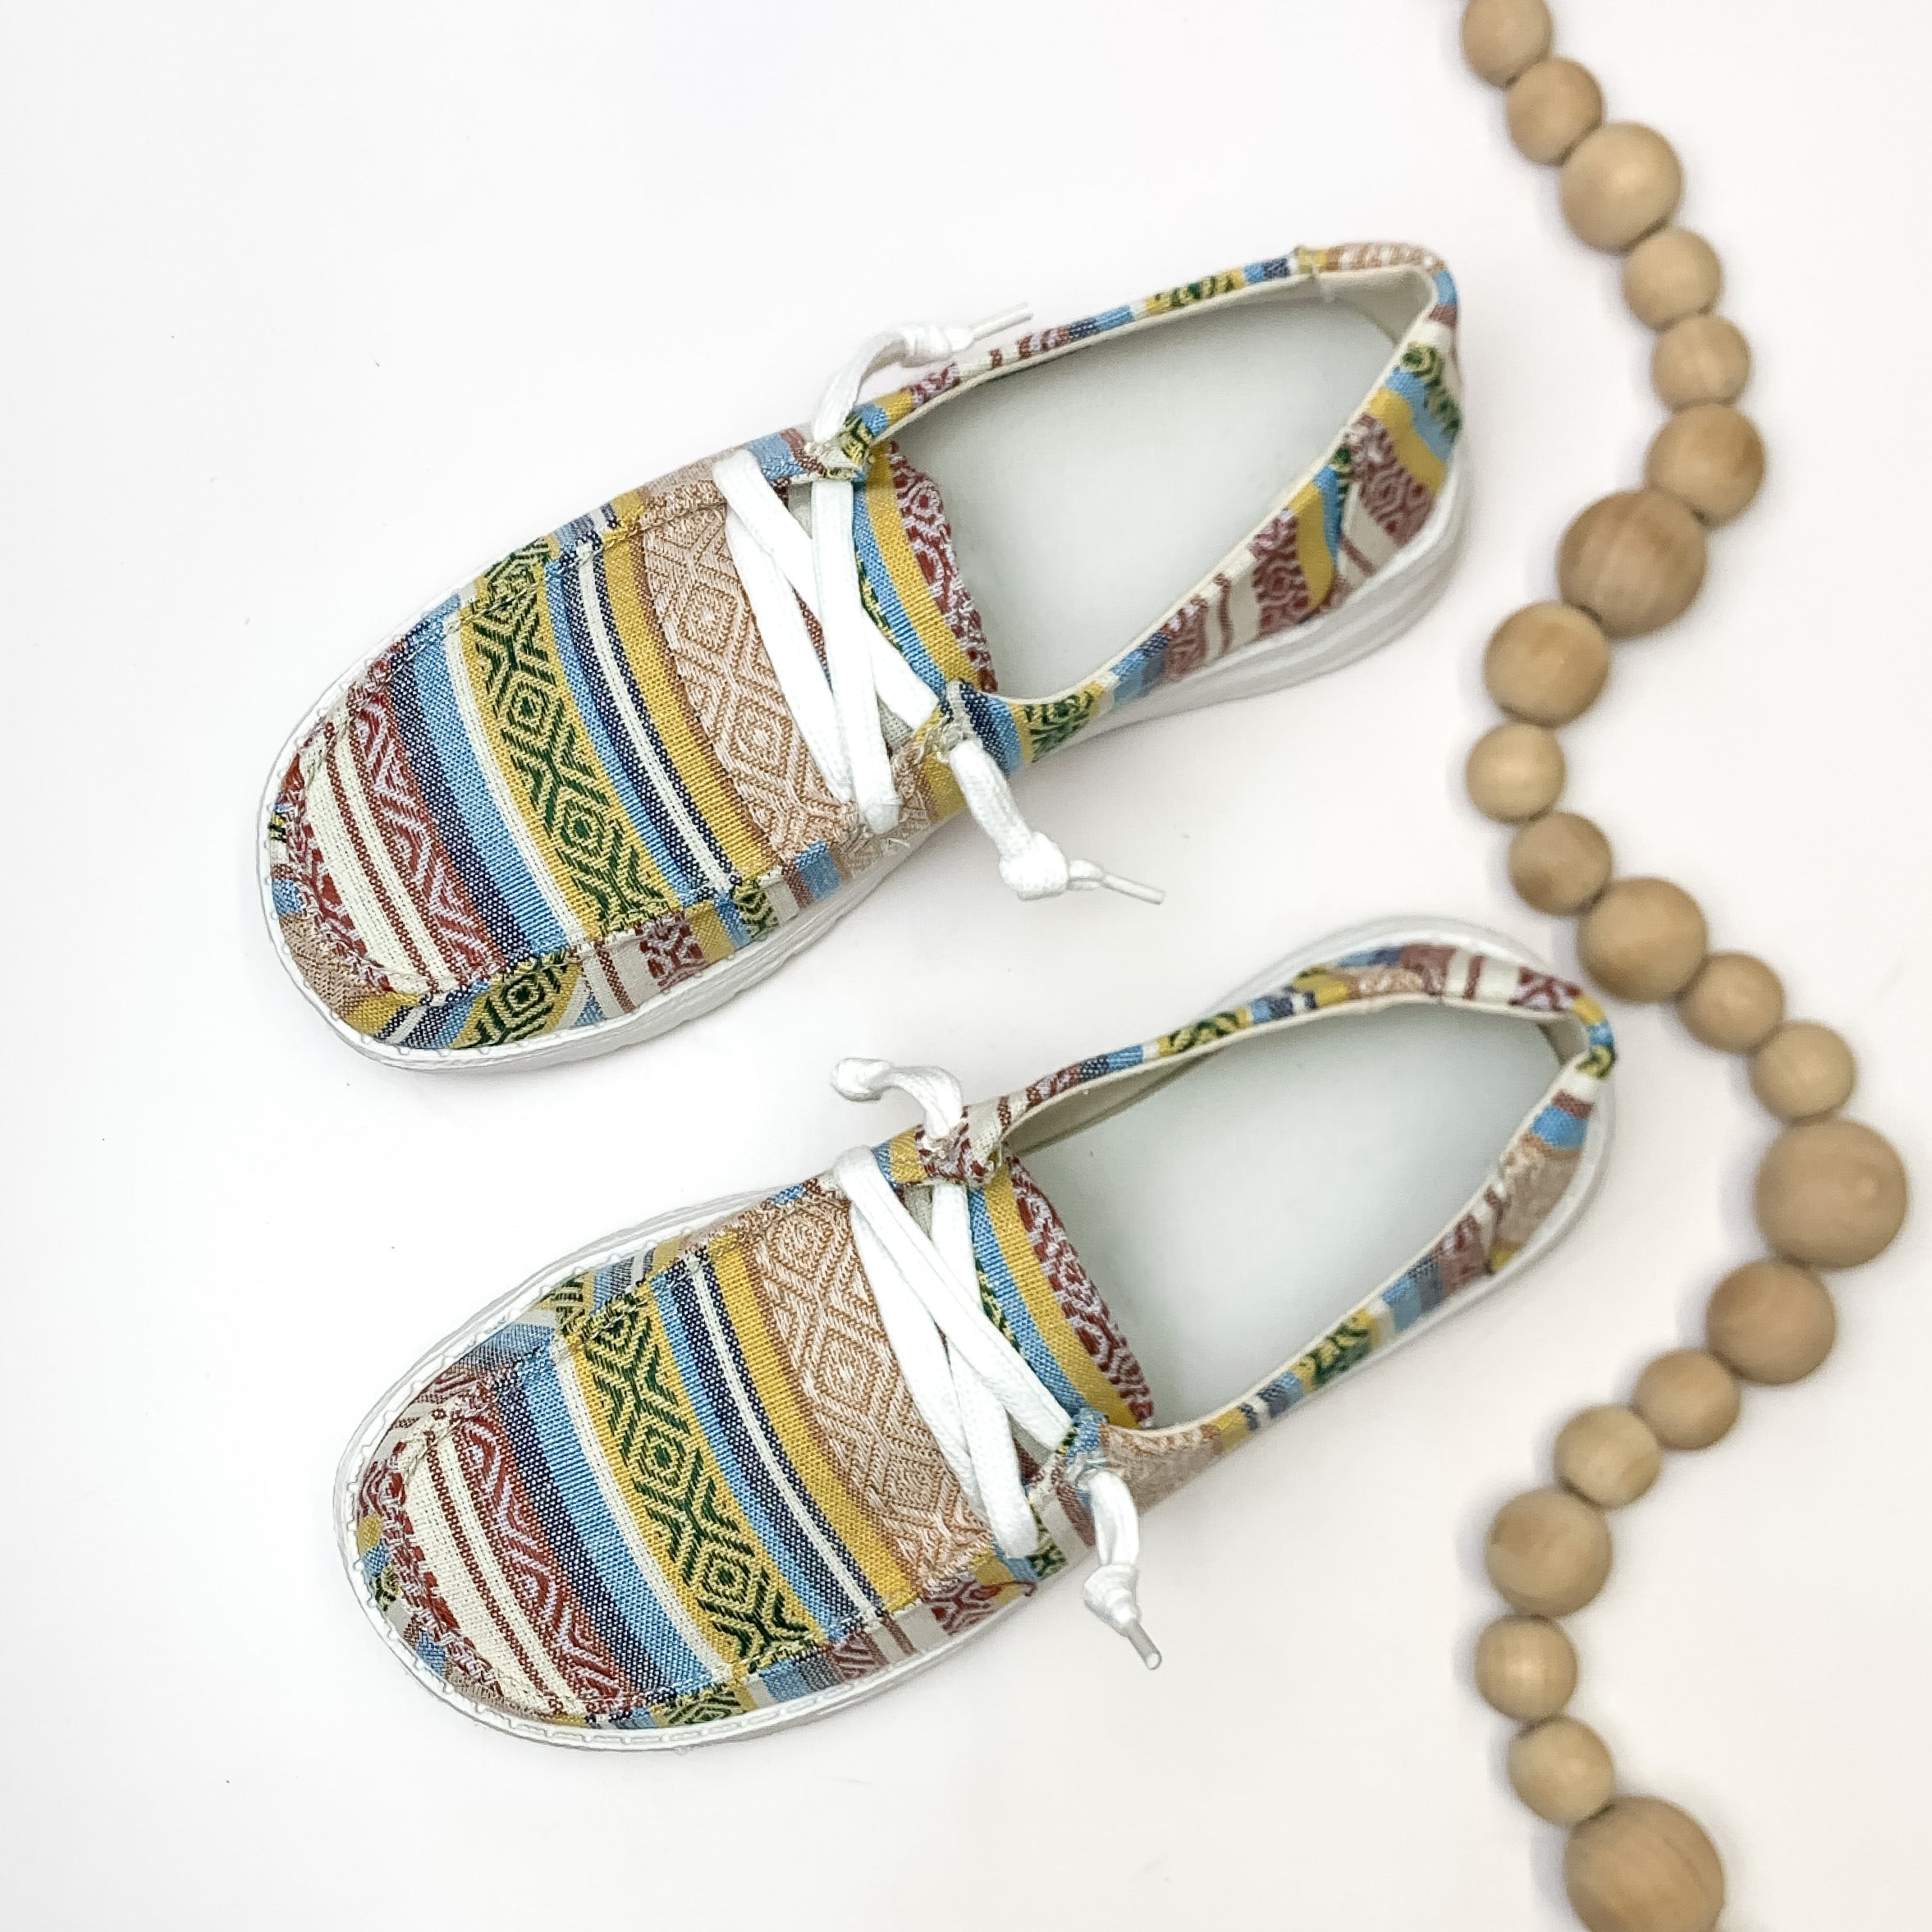 Very G | Have To Run Slip On Tribal Print Loafers with Laces in Cream Multi - Giddy Up Glamour Boutique